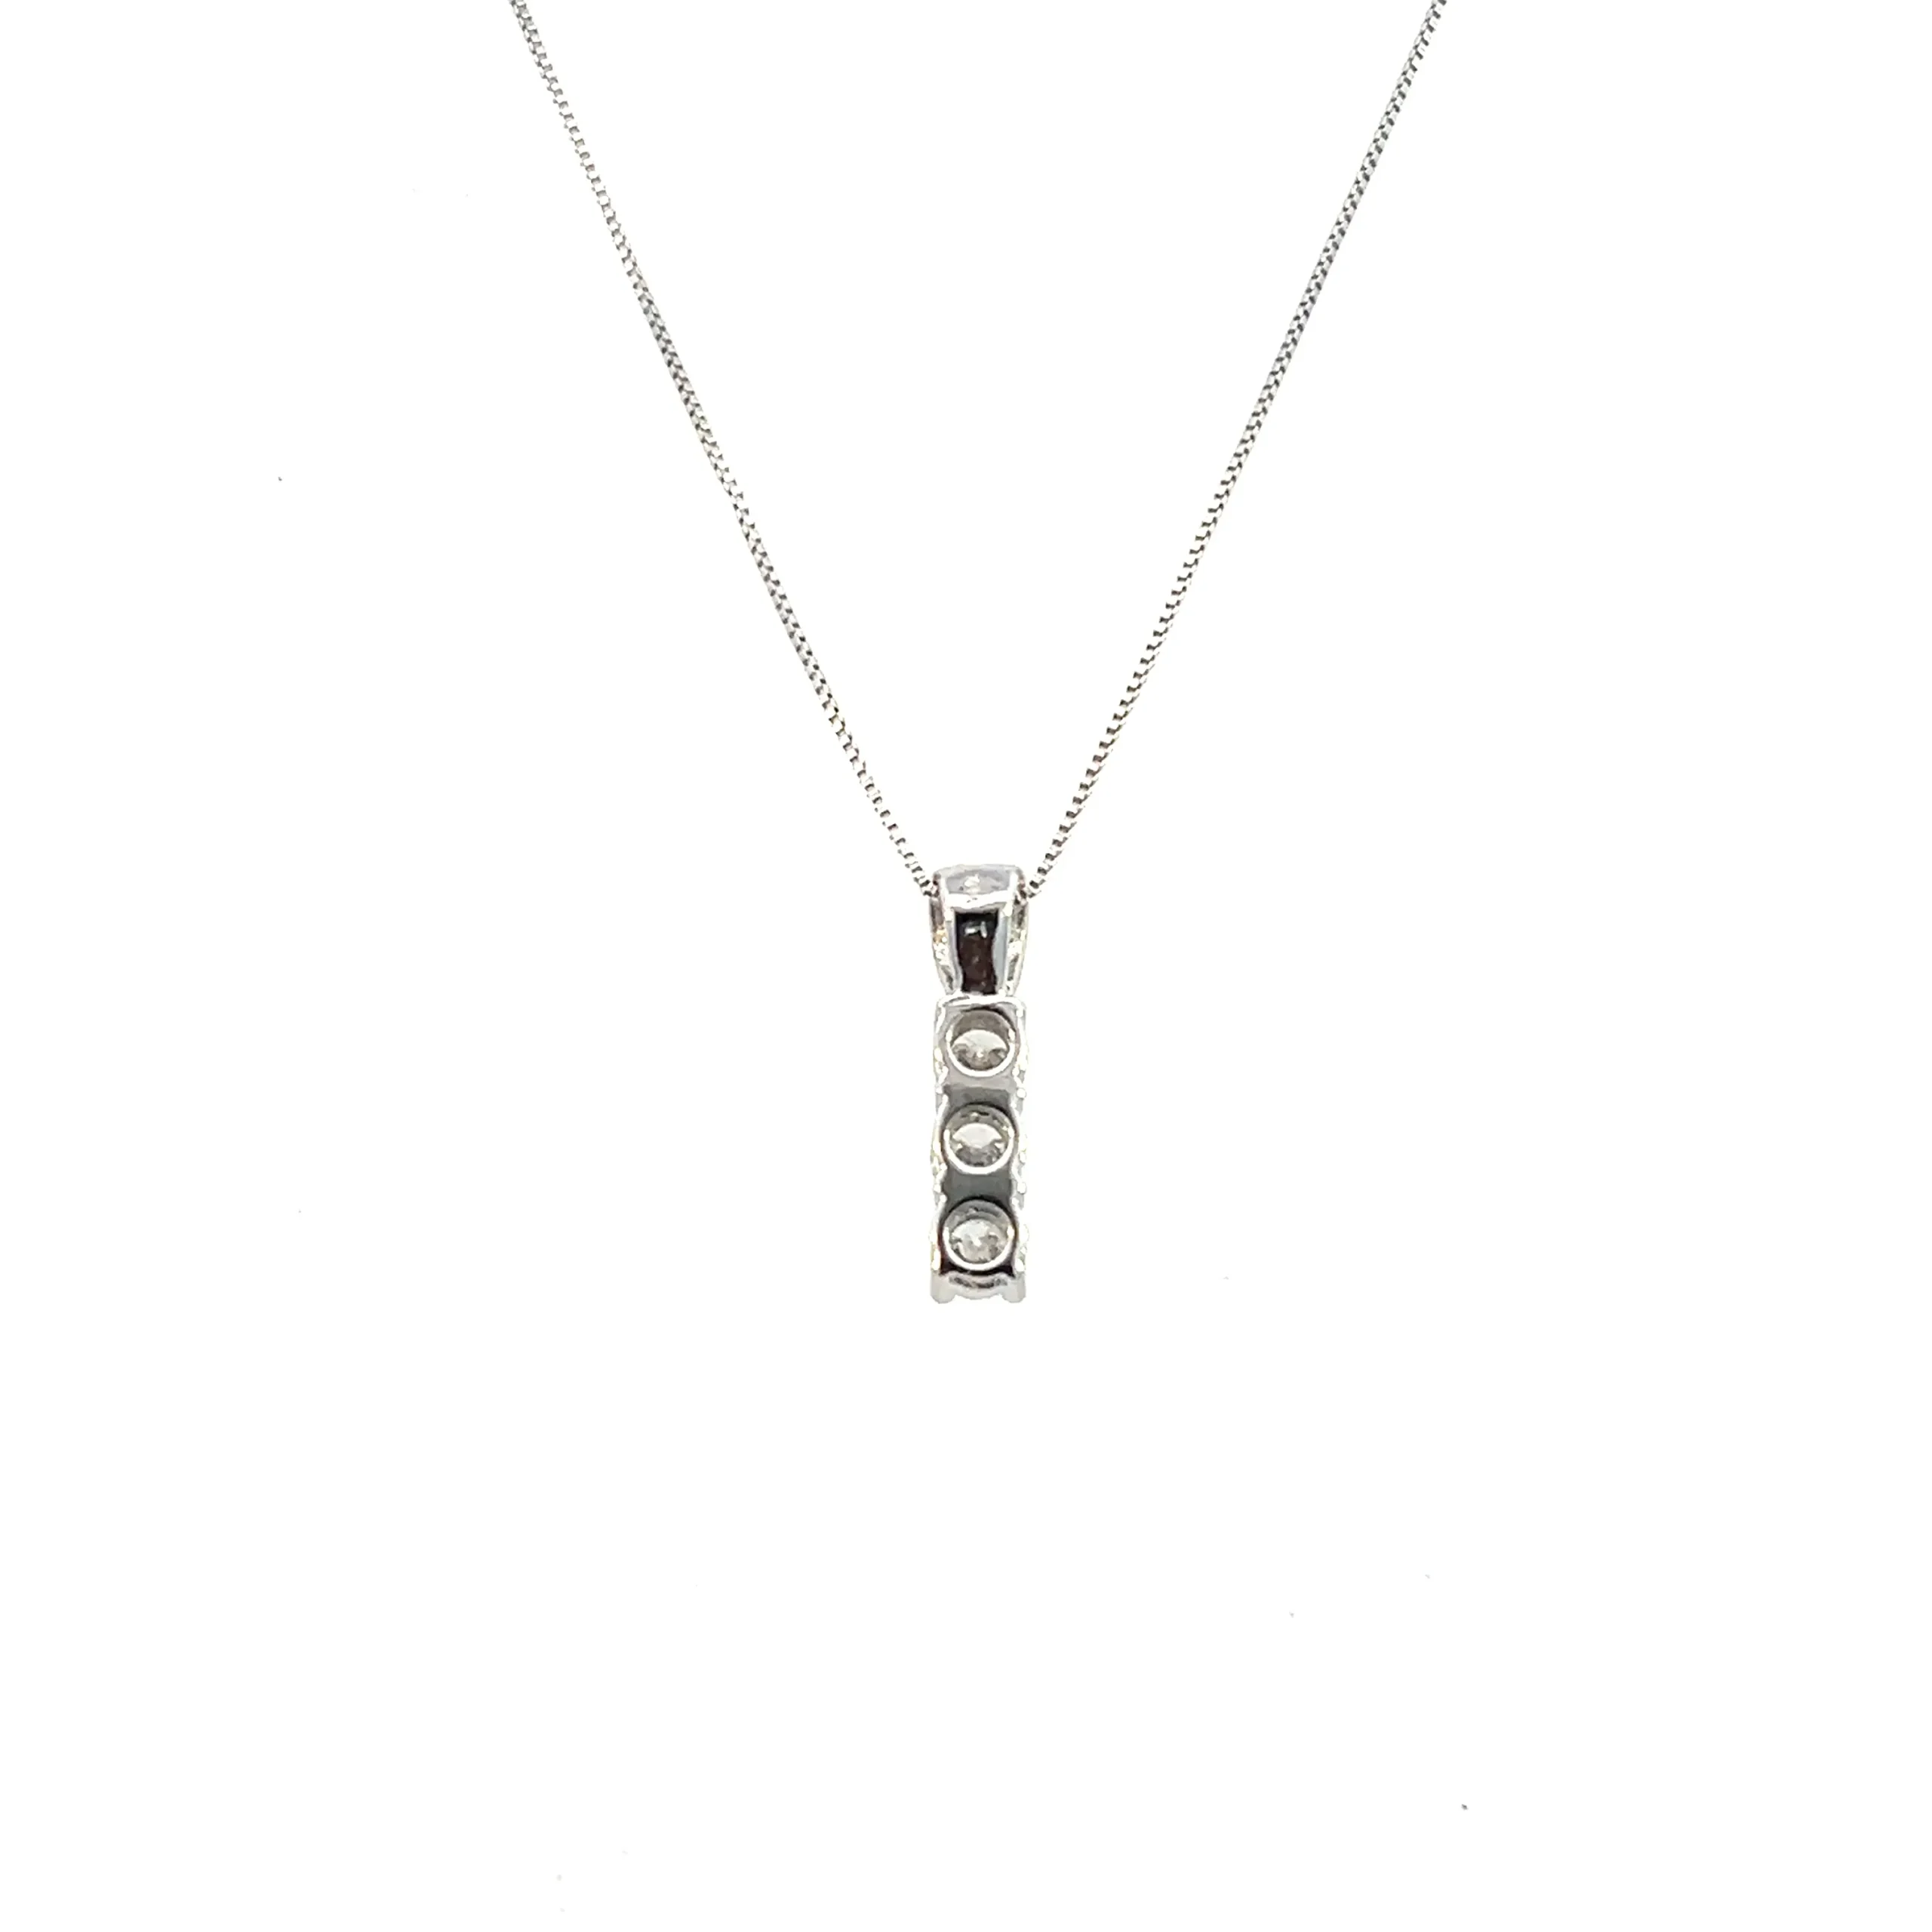 One estate three-stone diamond drop necklace crafted from 14 karat white gold containing a rectangle-shaped drop pendant set with 3 round brilliant diamonds weighing 0.47 carat total weight. The pendant is suspended from an 18" white gold box link chain with a spring ring clasp.